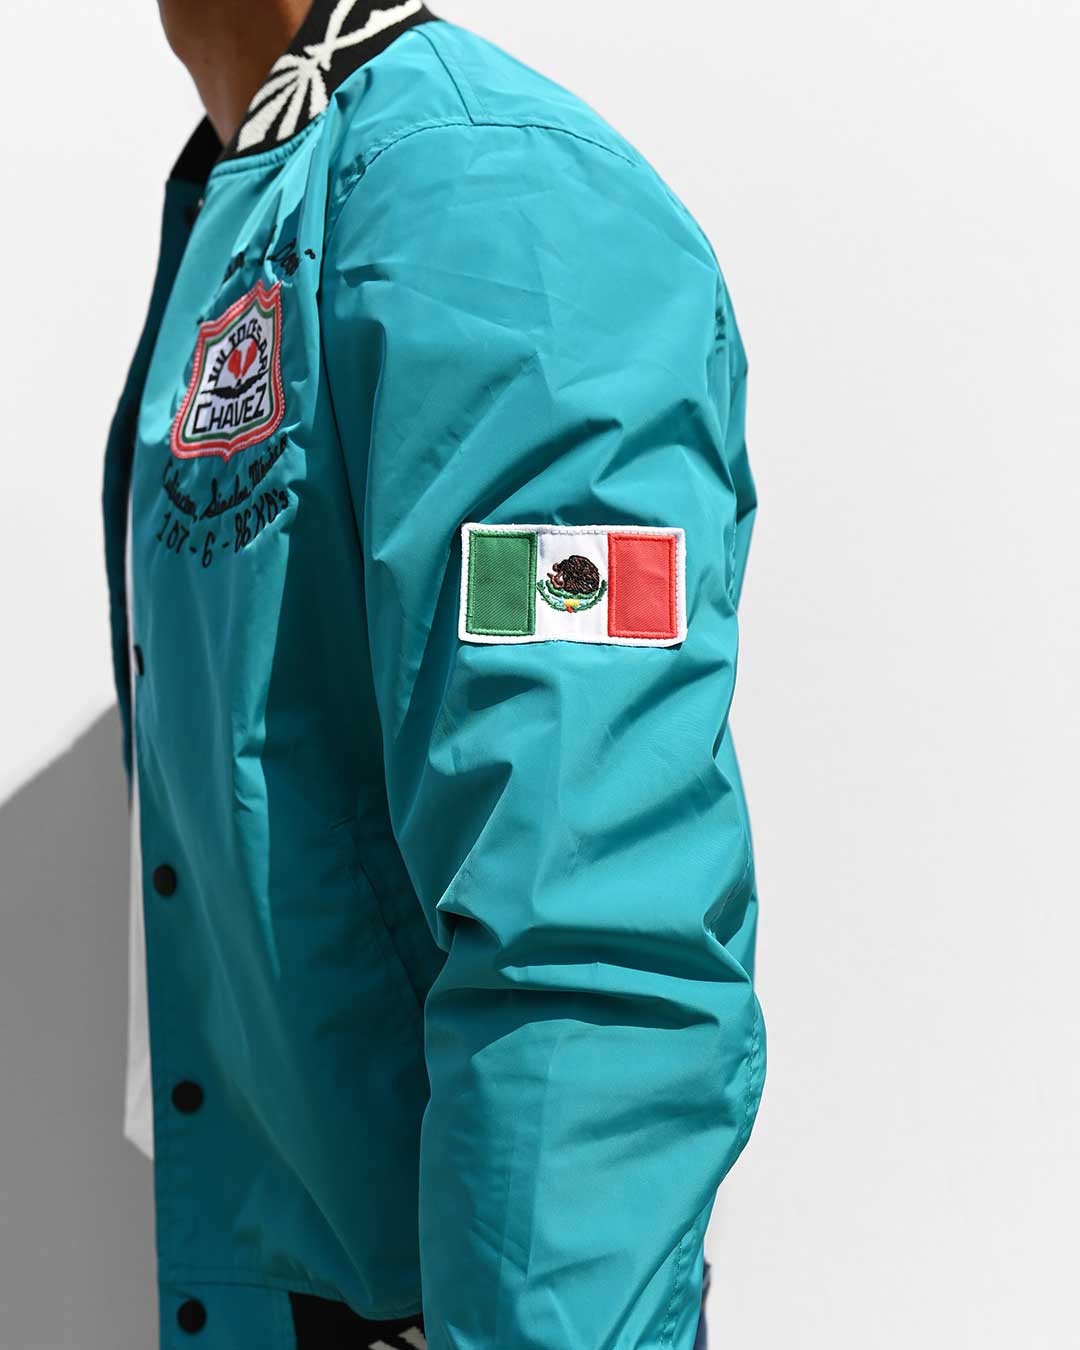 Chavez Campeon Stadium Jacket - Roots of Fight Canada